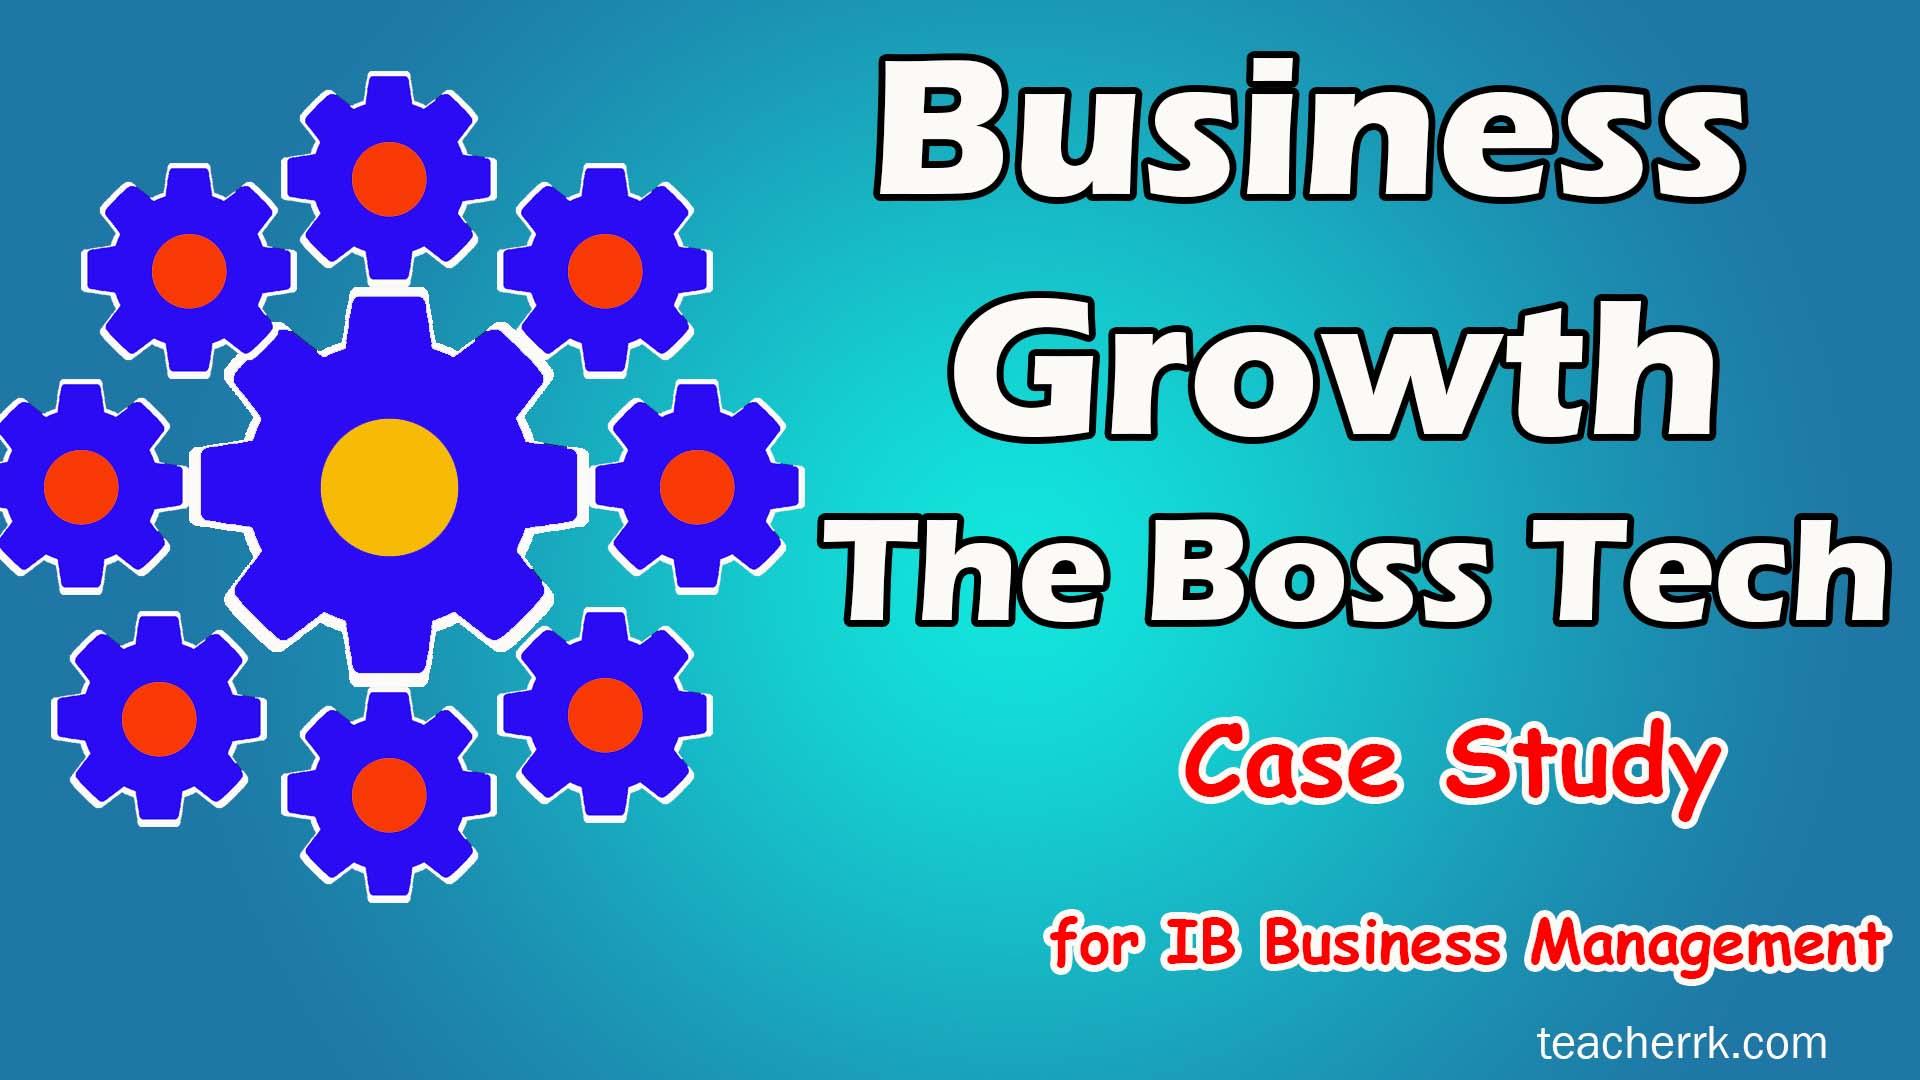 Business growth case study